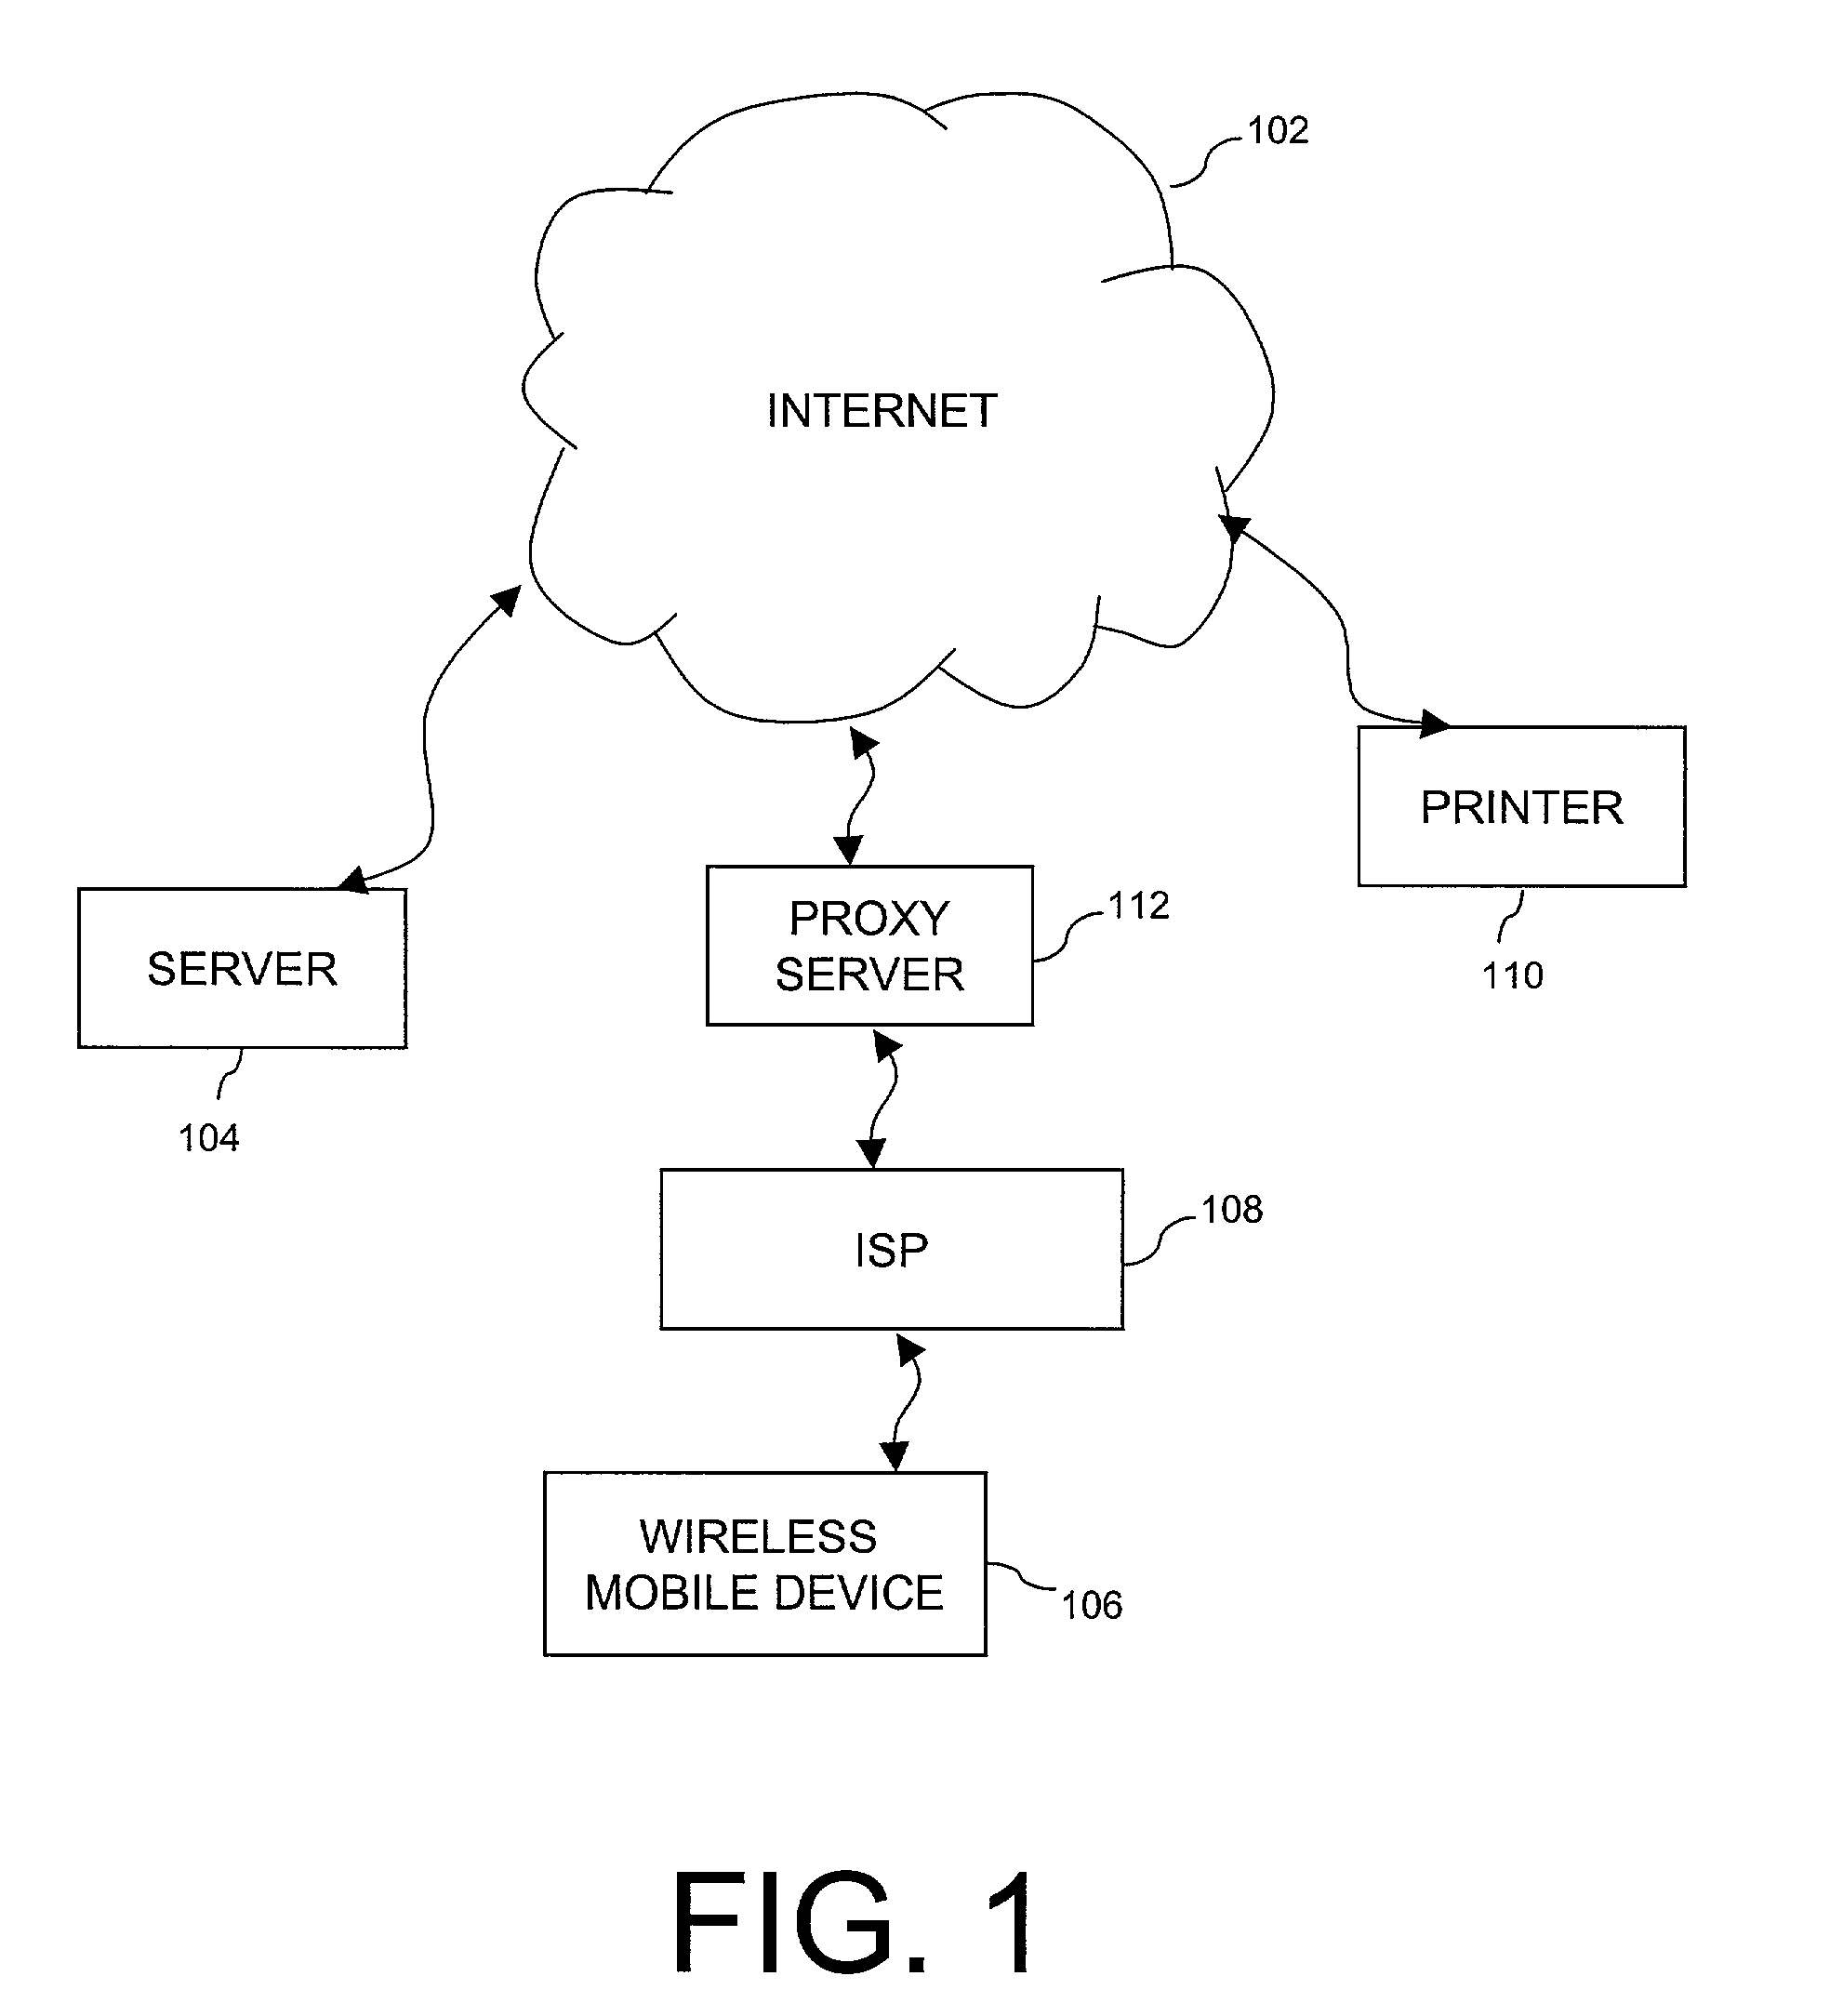 Apparatus, method and system for printing from a wireless mobile device over the internet